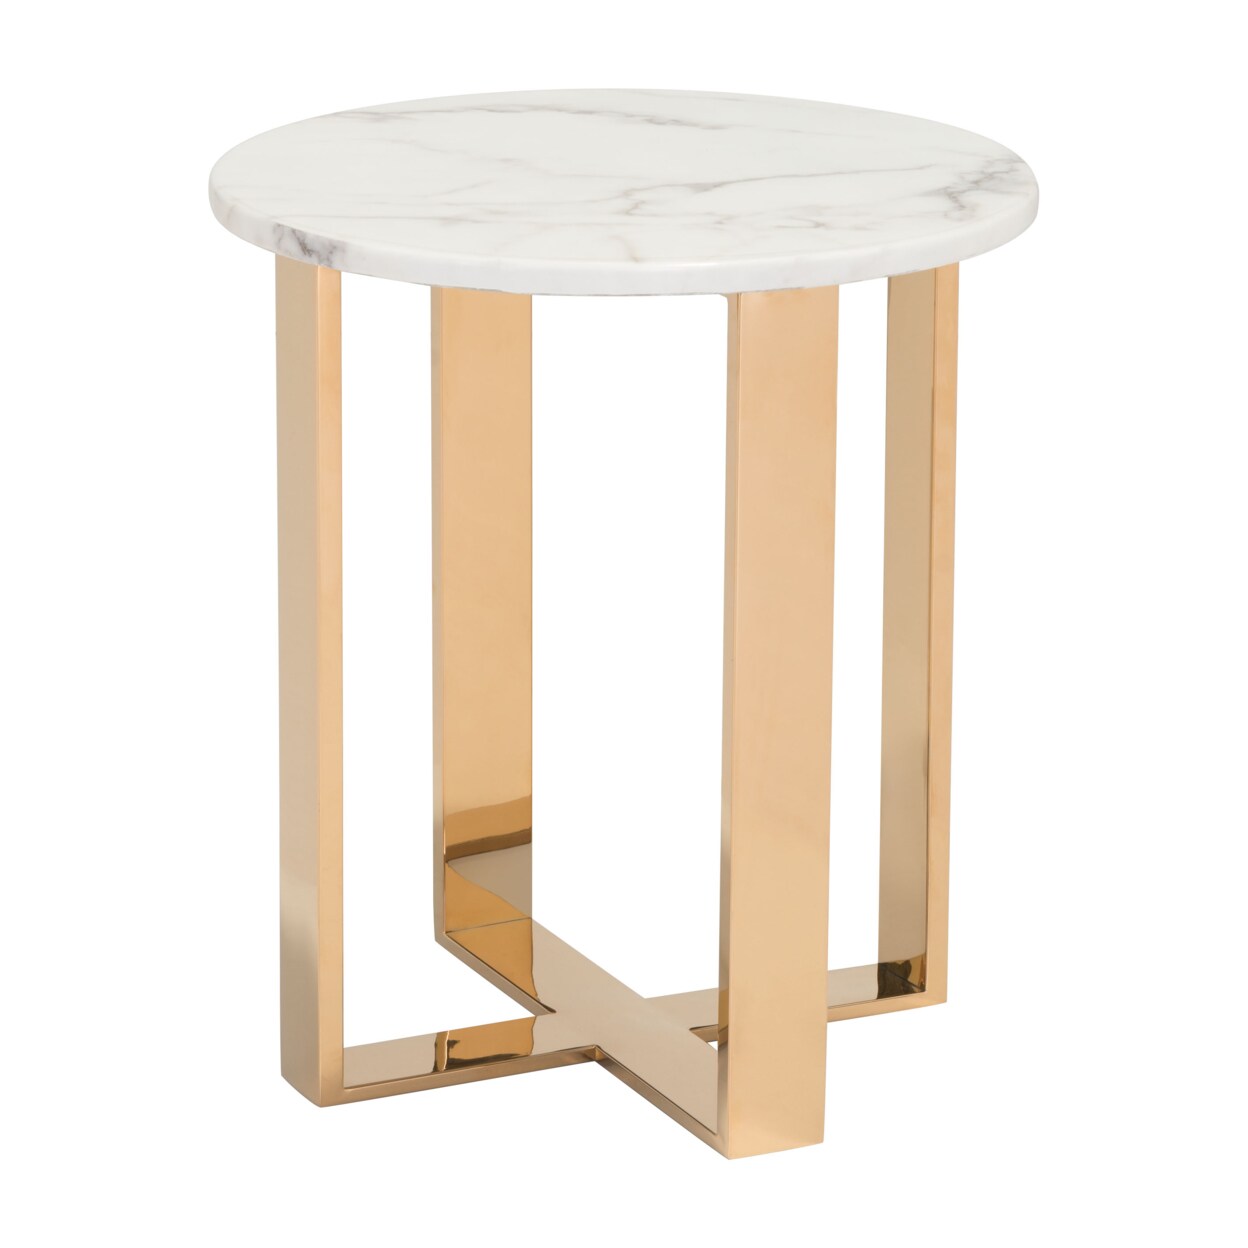 Zuo Modern Contemporary Inc. Atlas End Table White and Gold